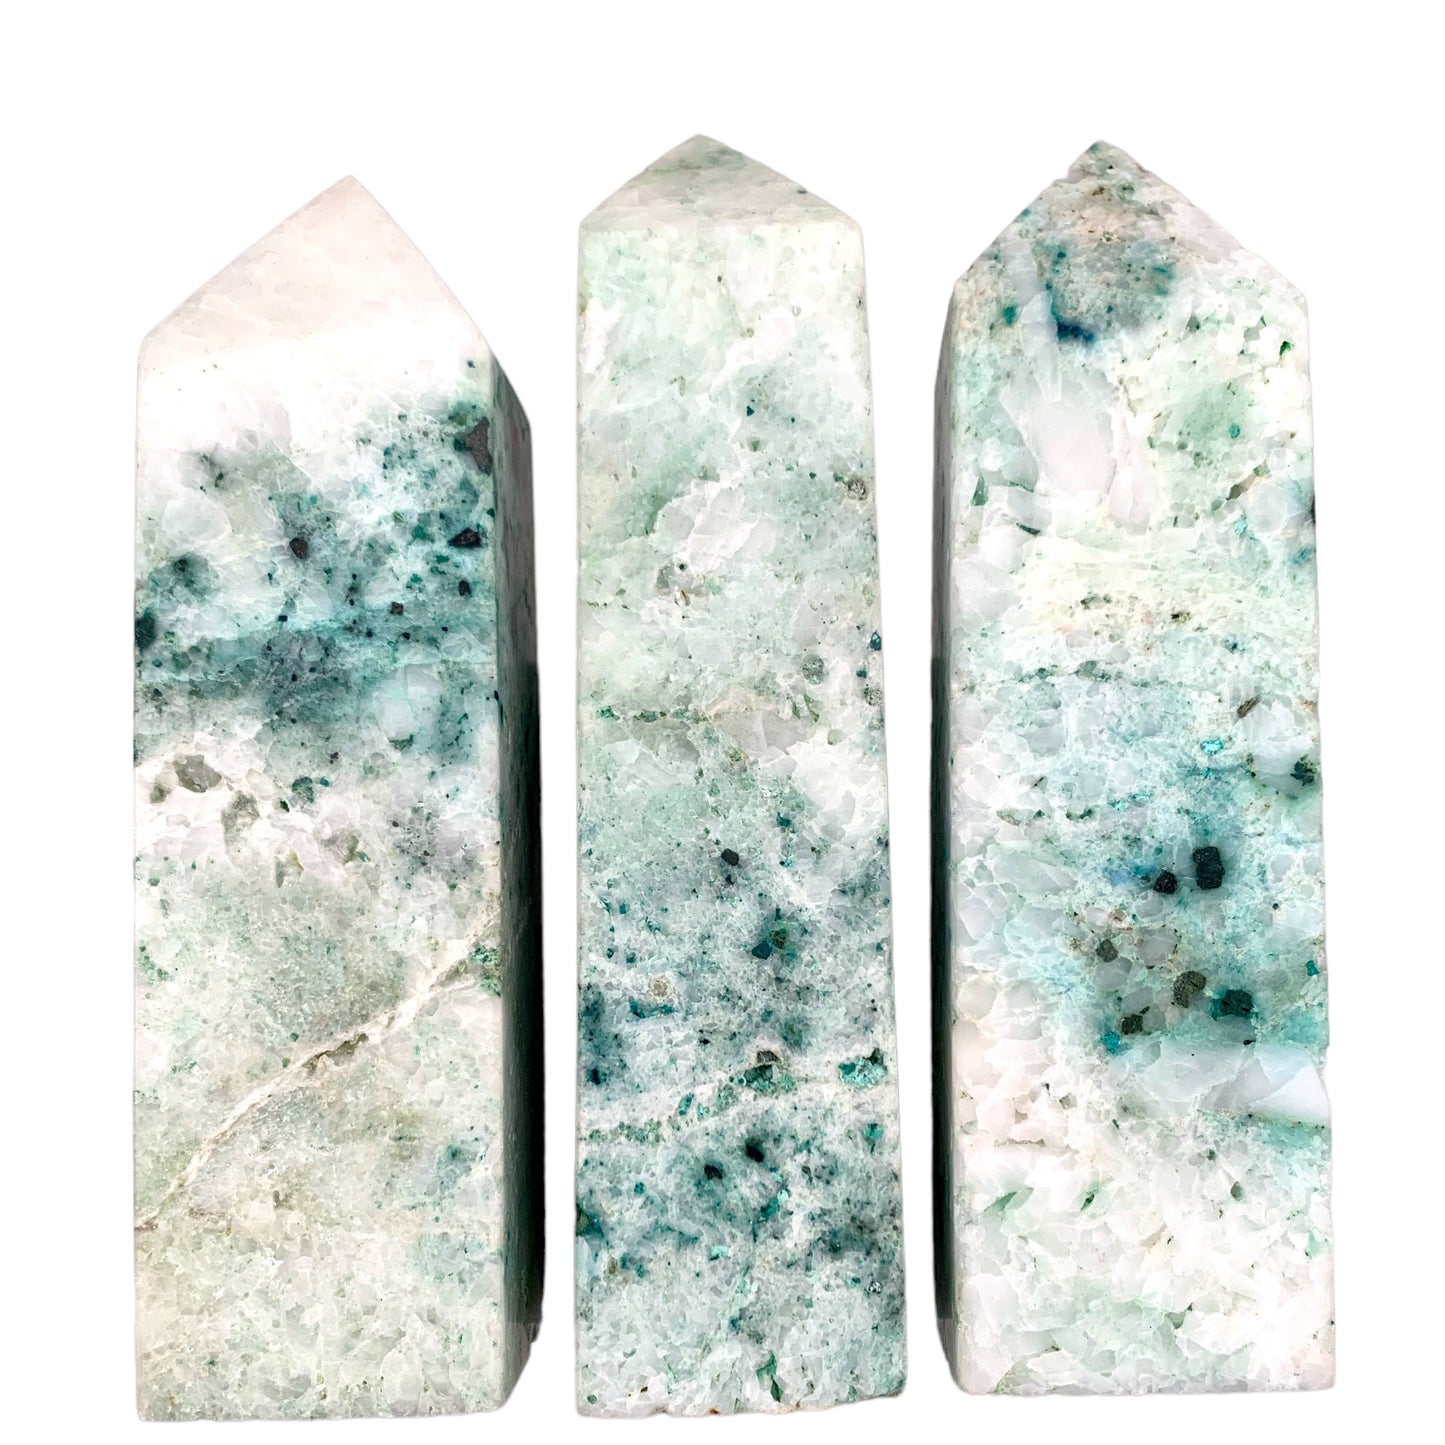 Chrysocolle - Point Stone inch - Prix au gramme - Chine - NEW622